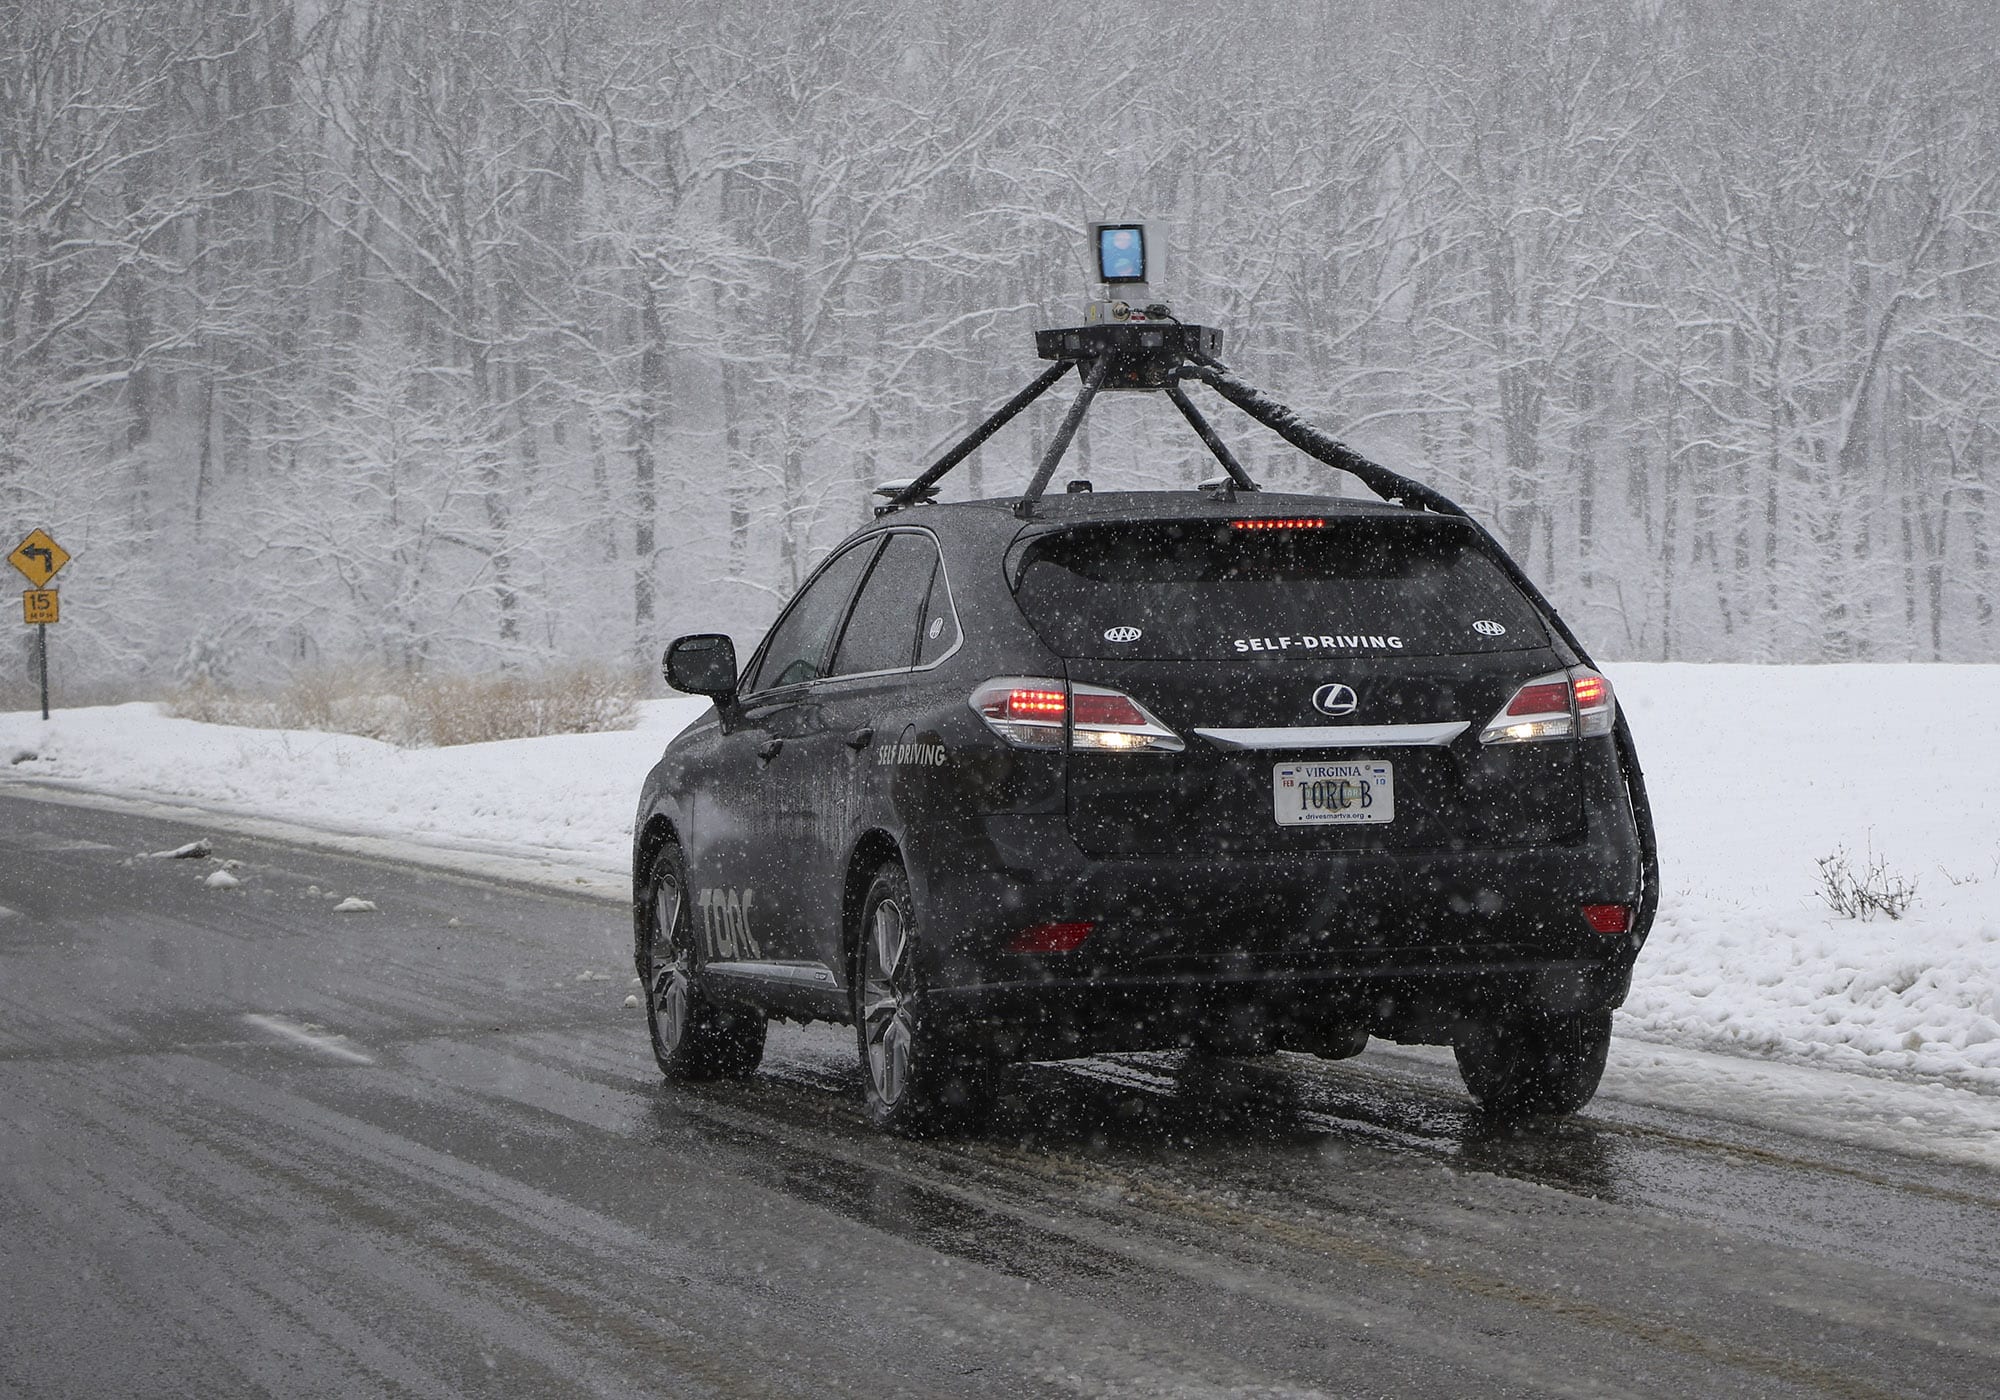 Asimov, Torc's self-driving vehicle, driving safely in a snowstorm.